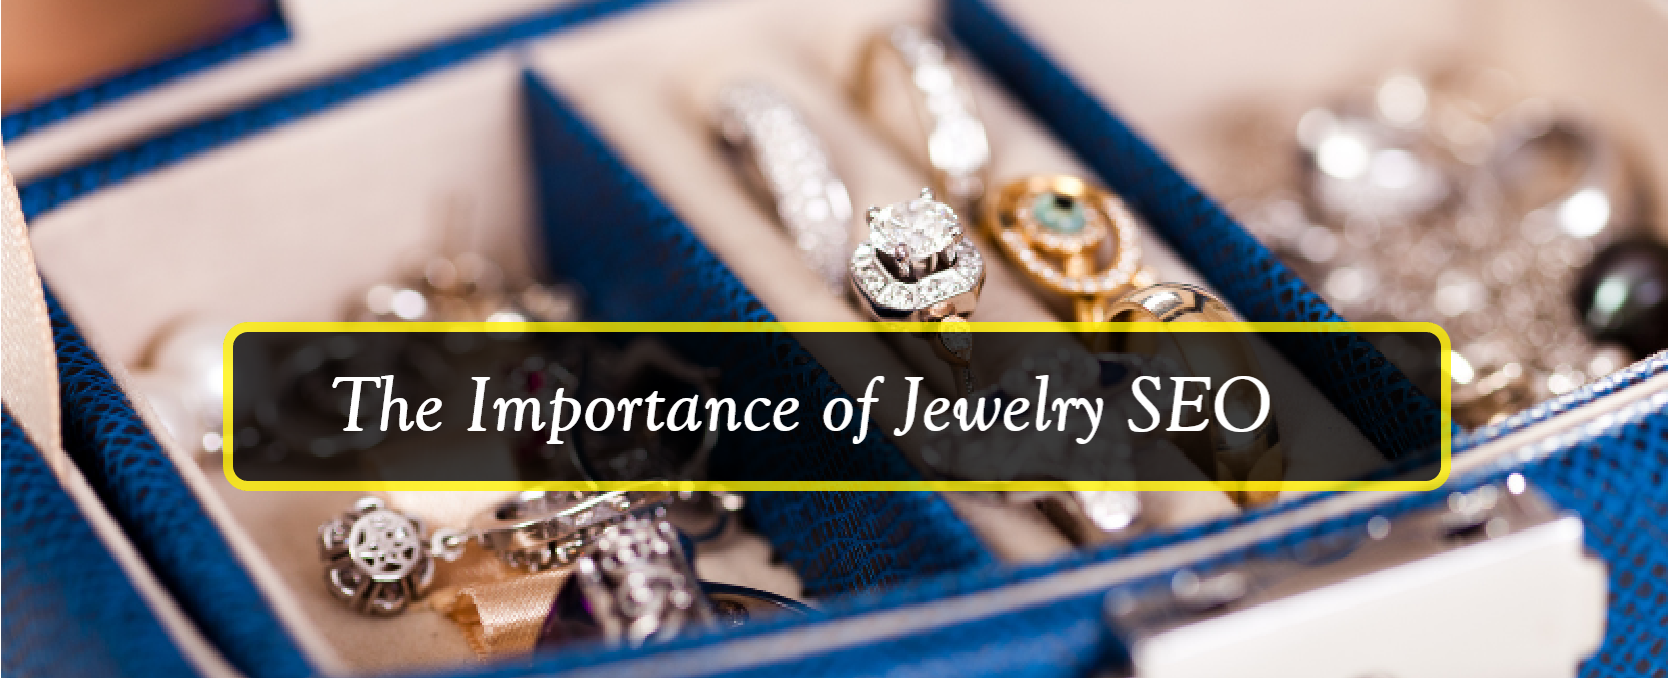 The Importance of Jewelry SEO